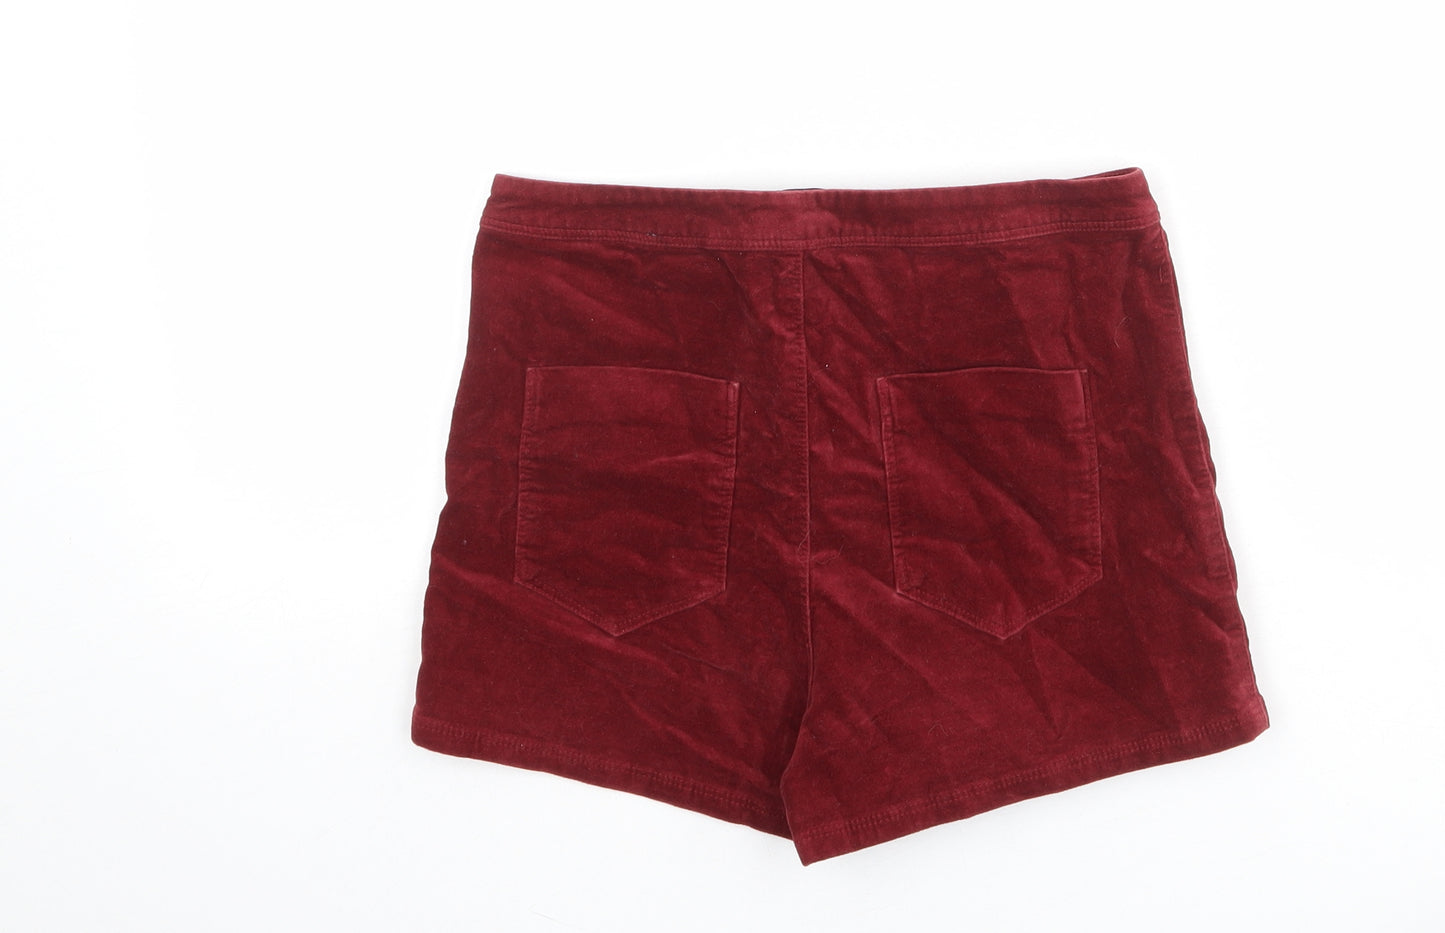 River Island Womens Red Cotton Basic Shorts Size 10 L4 in Regular Zip